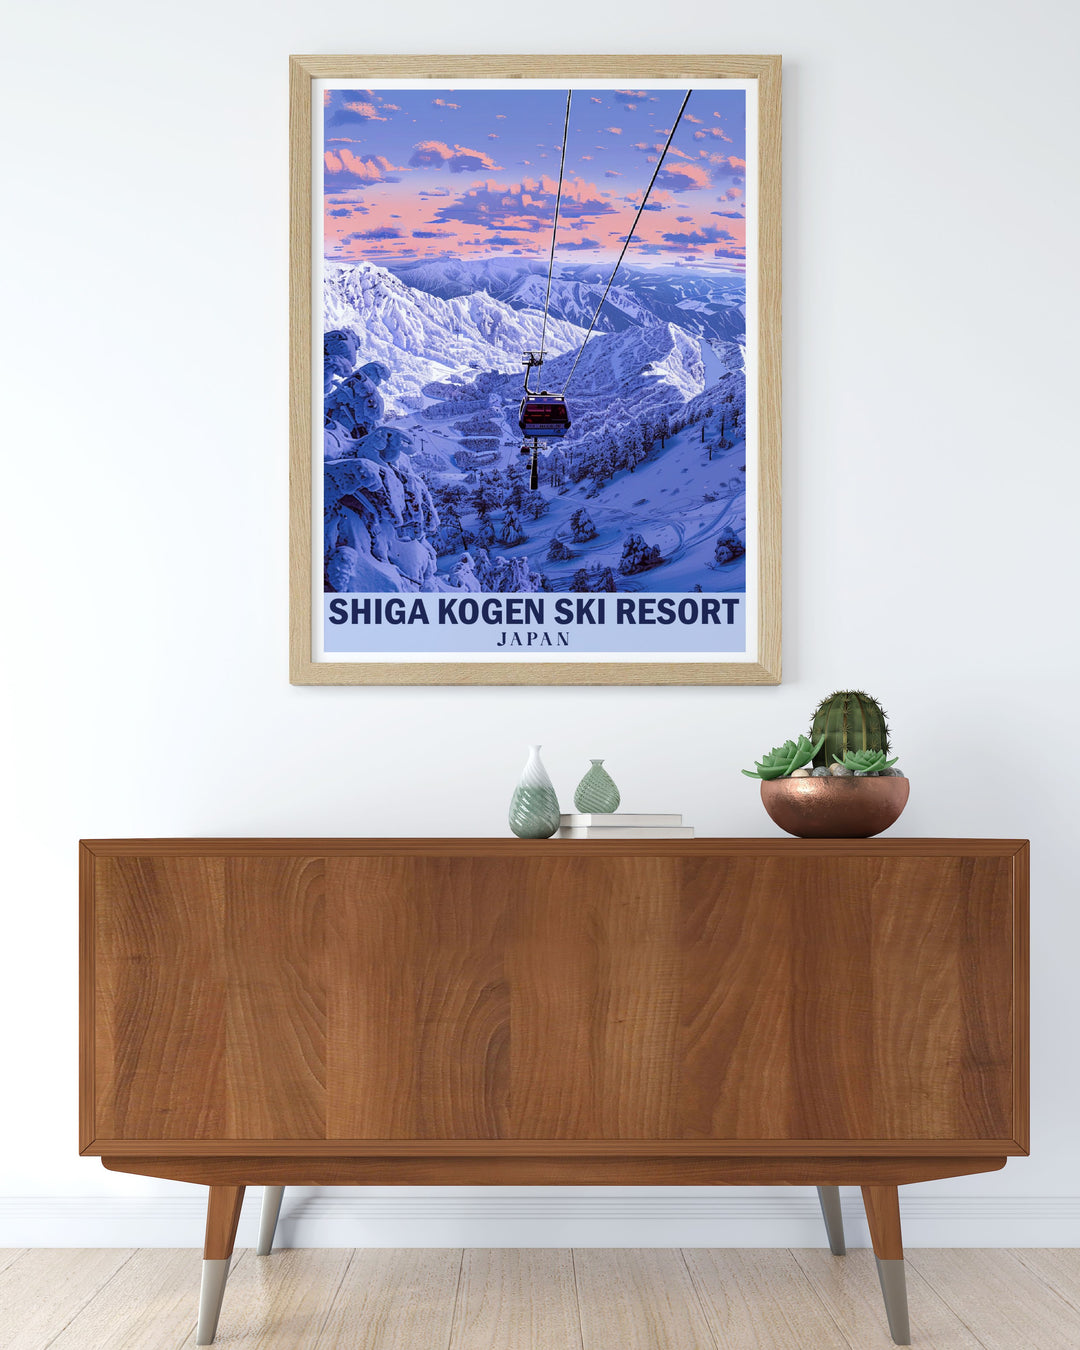 This vintage inspired poster of Shiga Kogen Ski Resort captures the thrill and beauty of skiing in the Japanese Alps, offering a glimpse into one of Japans premier winter destinations.